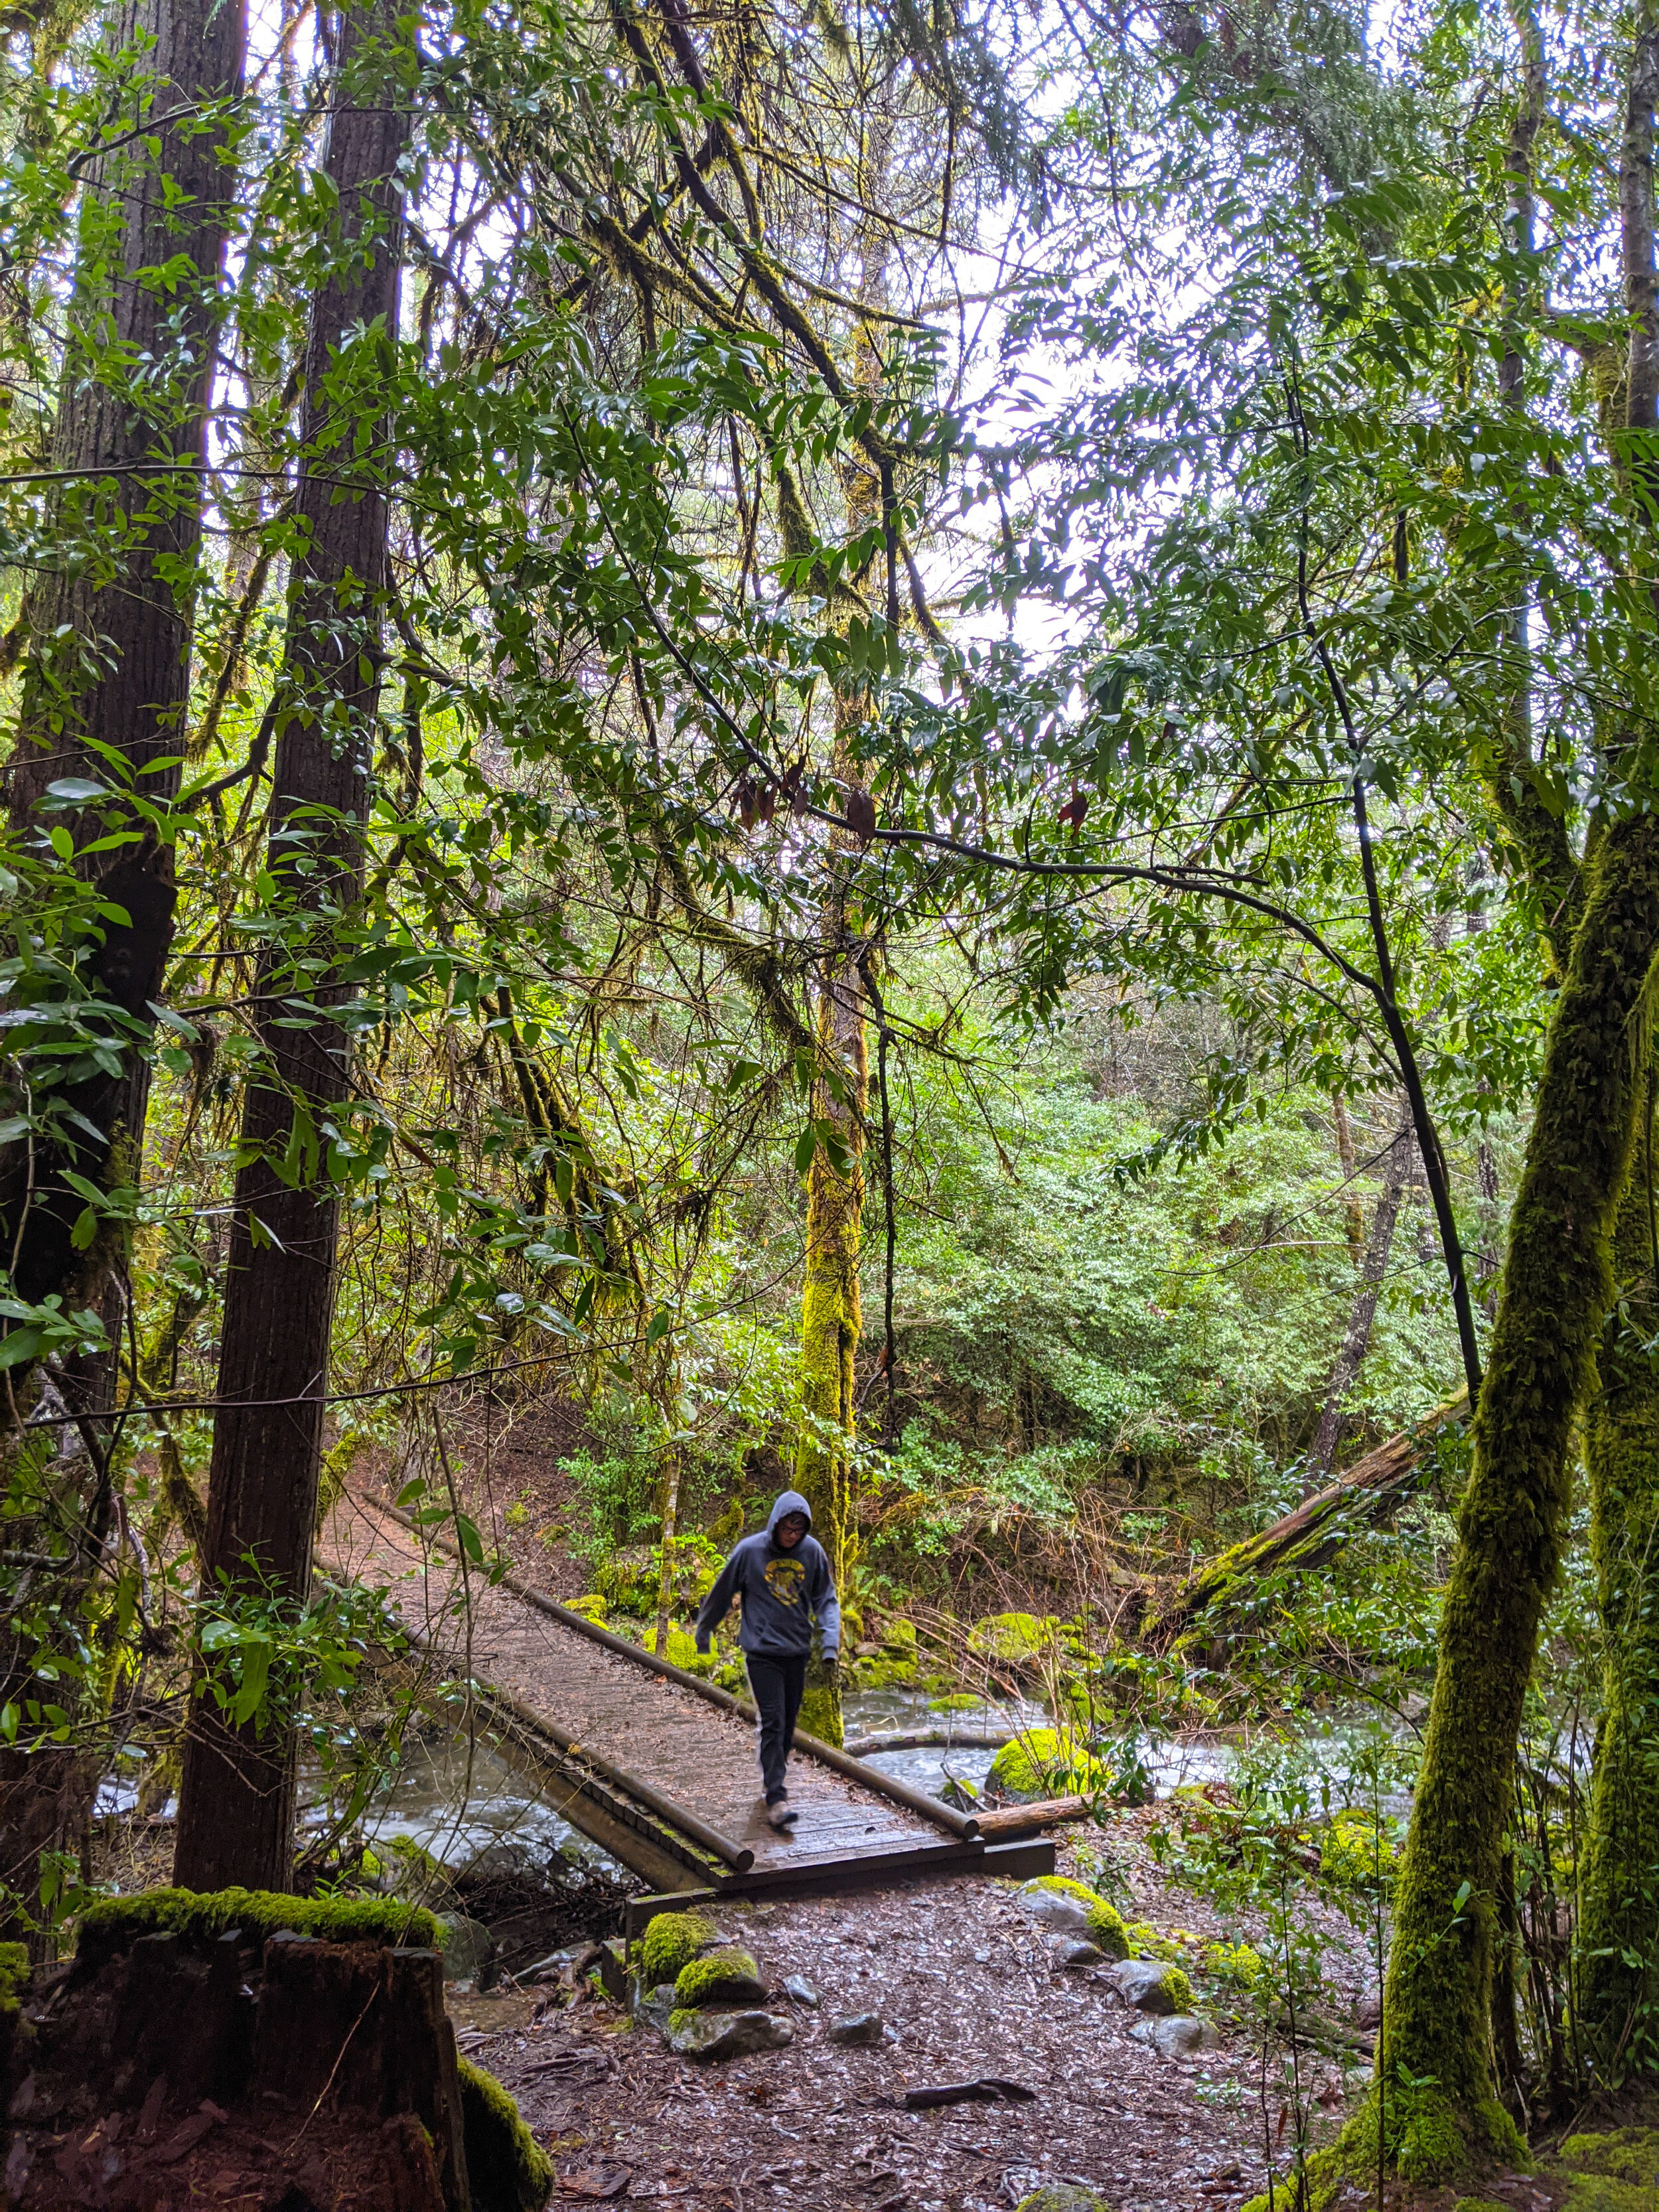 Limpy Botanical Interpretive Trail - Grants Pass - What to do in Southern Oregon